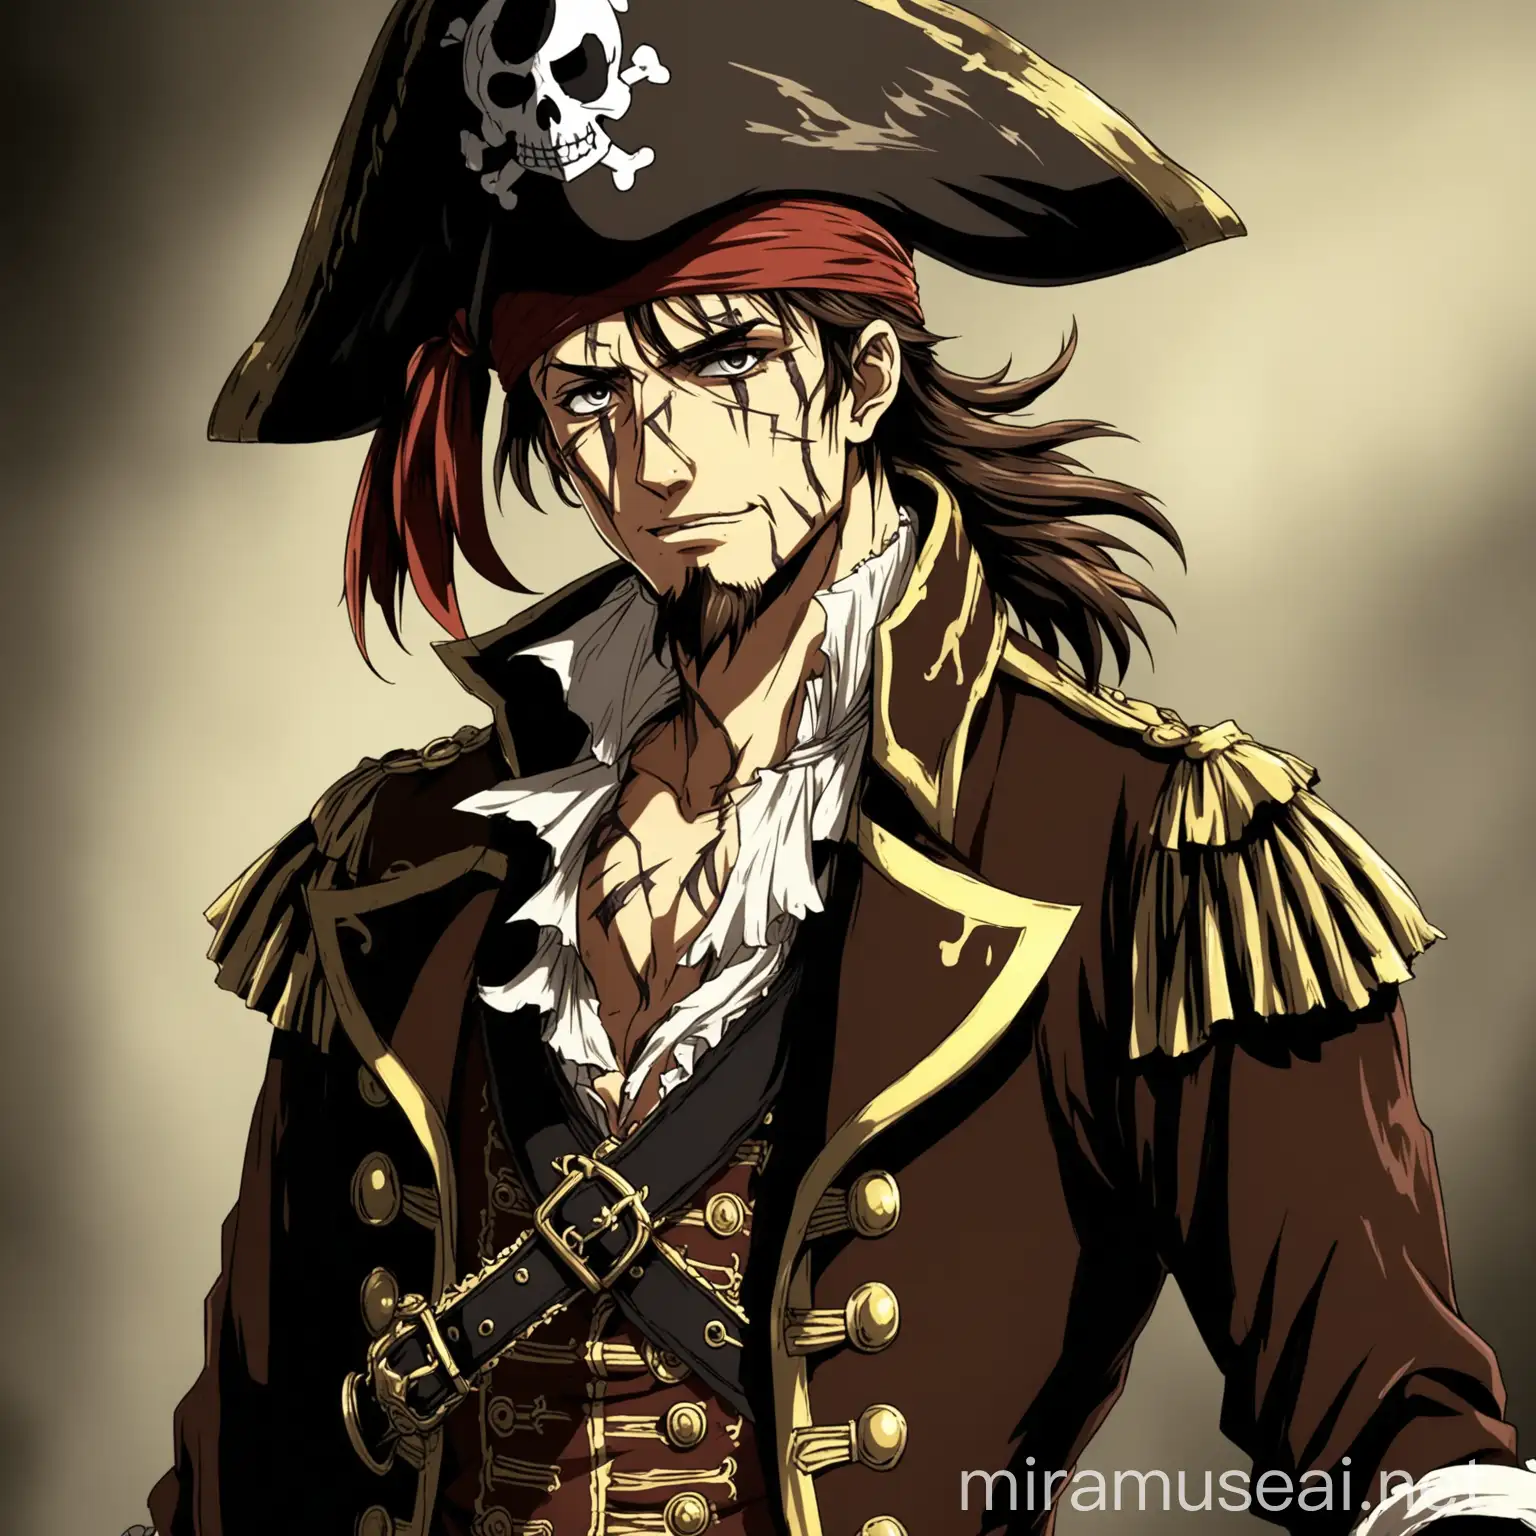 a pirate man, he wears a classic pirate clothes, he has the face full of scars, he use a victorian fun, he has dark eyes and brown hair. in anime